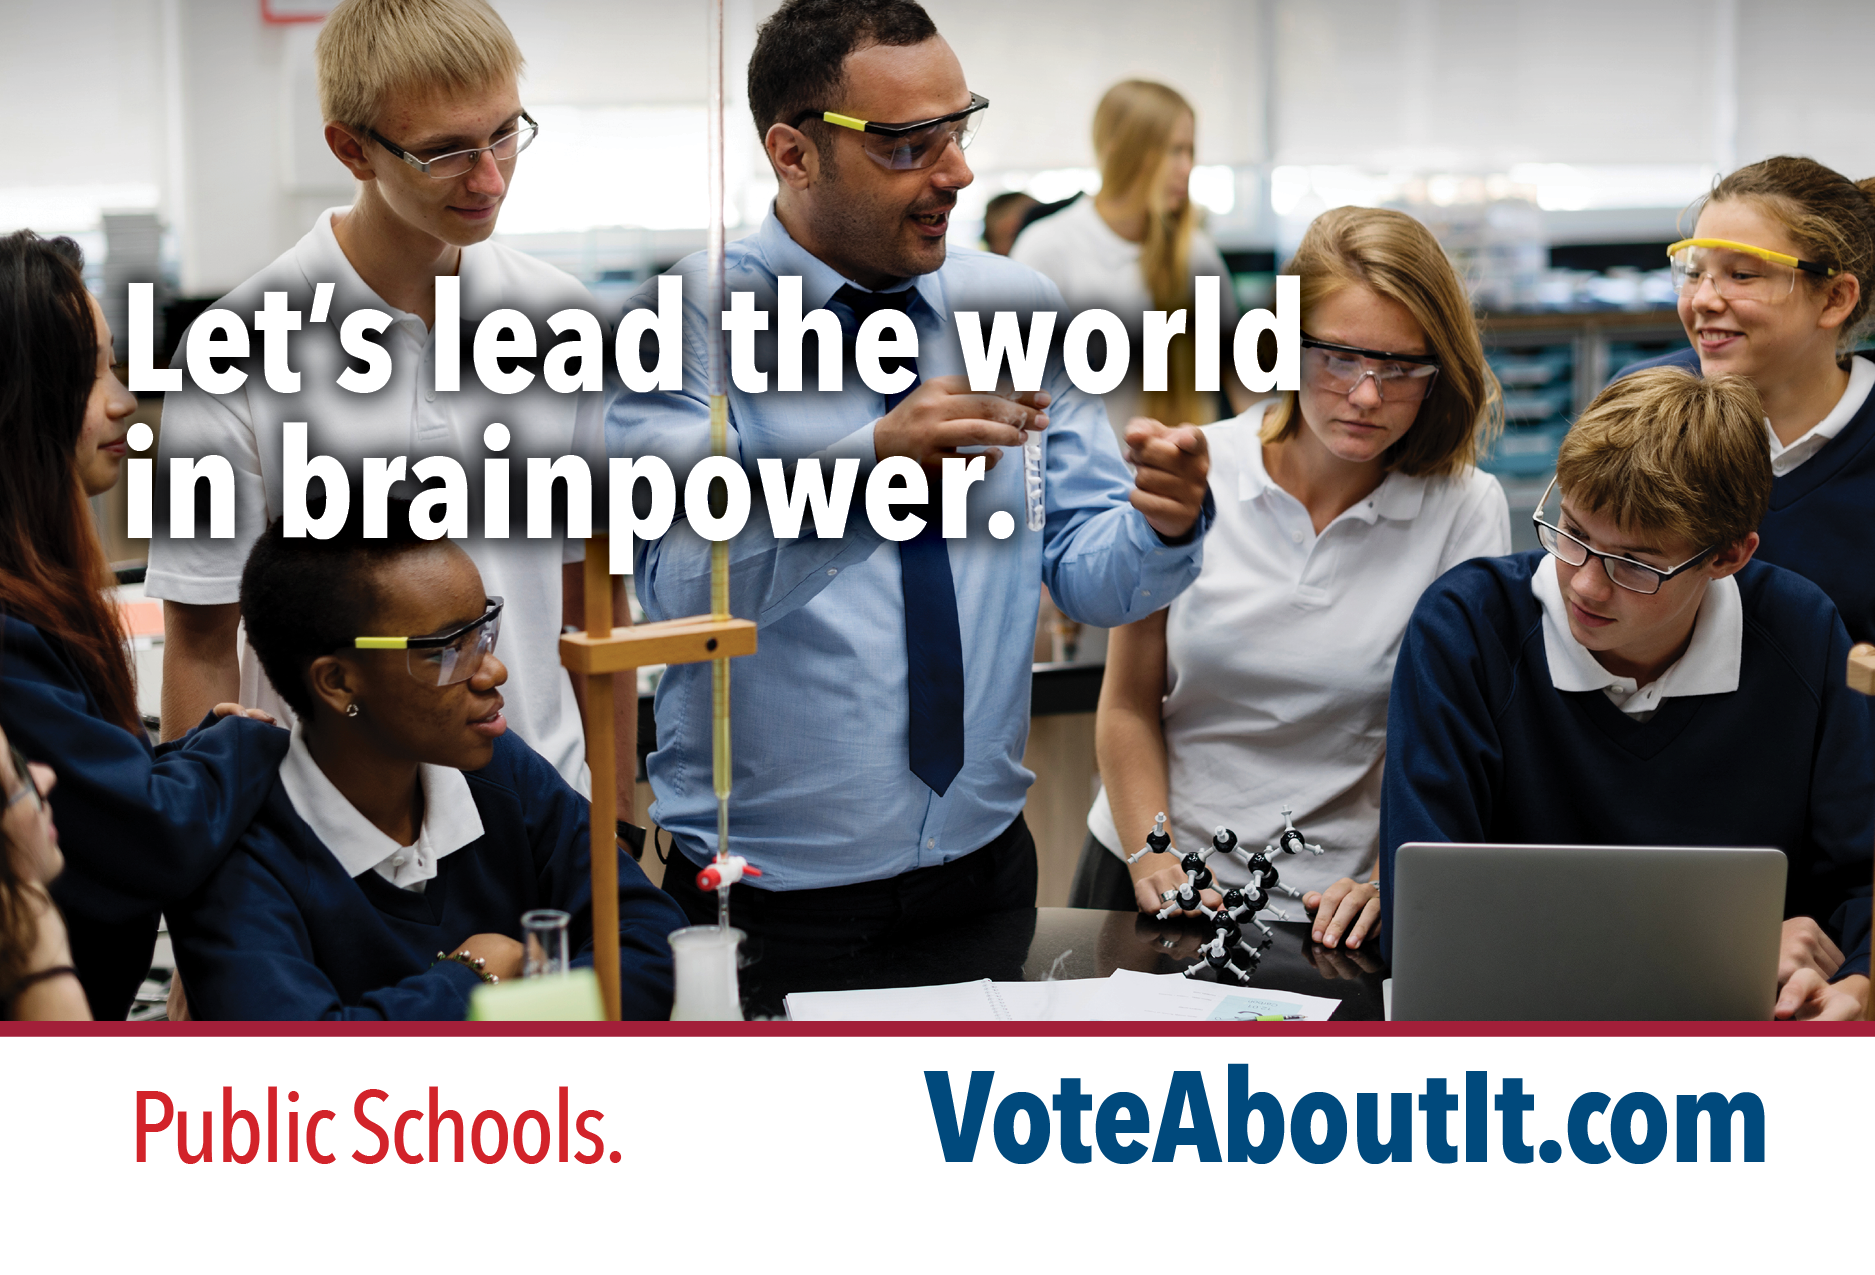 Let's lead the world in brainpower.